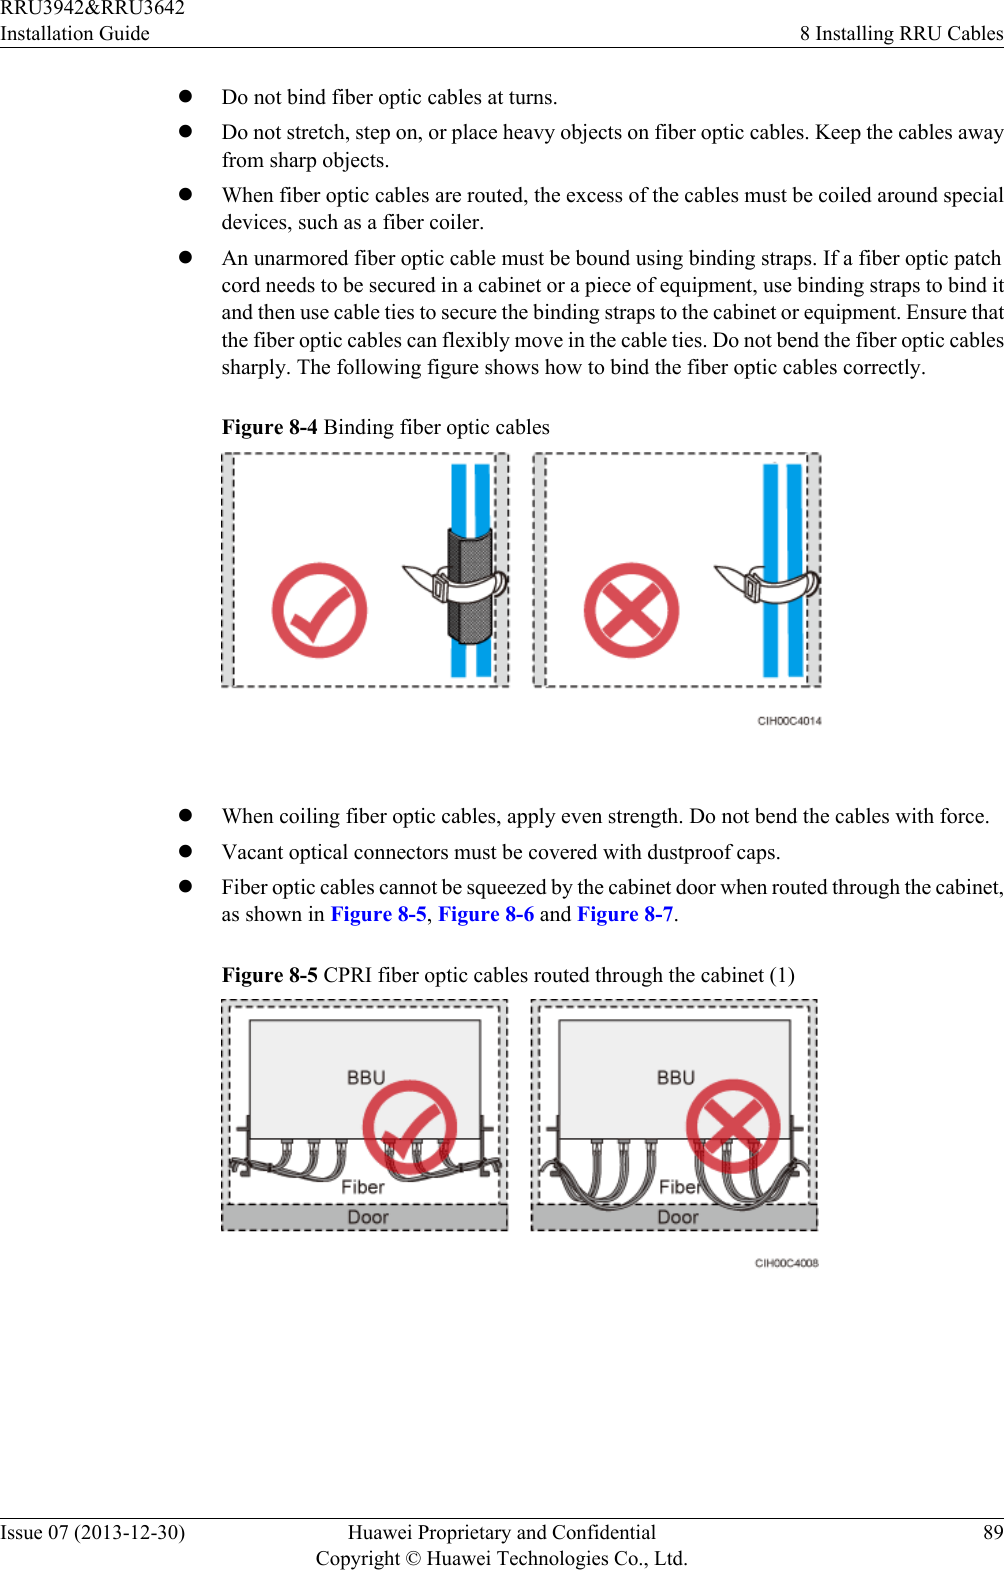 lDo not bind fiber optic cables at turns.lDo not stretch, step on, or place heavy objects on fiber optic cables. Keep the cables awayfrom sharp objects.lWhen fiber optic cables are routed, the excess of the cables must be coiled around specialdevices, such as a fiber coiler.lAn unarmored fiber optic cable must be bound using binding straps. If a fiber optic patchcord needs to be secured in a cabinet or a piece of equipment, use binding straps to bind itand then use cable ties to secure the binding straps to the cabinet or equipment. Ensure thatthe fiber optic cables can flexibly move in the cable ties. Do not bend the fiber optic cablessharply. The following figure shows how to bind the fiber optic cables correctly.Figure 8-4 Binding fiber optic cables lWhen coiling fiber optic cables, apply even strength. Do not bend the cables with force.lVacant optical connectors must be covered with dustproof caps.lFiber optic cables cannot be squeezed by the cabinet door when routed through the cabinet,as shown in Figure 8-5, Figure 8-6 and Figure 8-7.Figure 8-5 CPRI fiber optic cables routed through the cabinet (1) RRU3942&amp;RRU3642Installation Guide 8 Installing RRU CablesIssue 07 (2013-12-30) Huawei Proprietary and ConfidentialCopyright © Huawei Technologies Co., Ltd.89